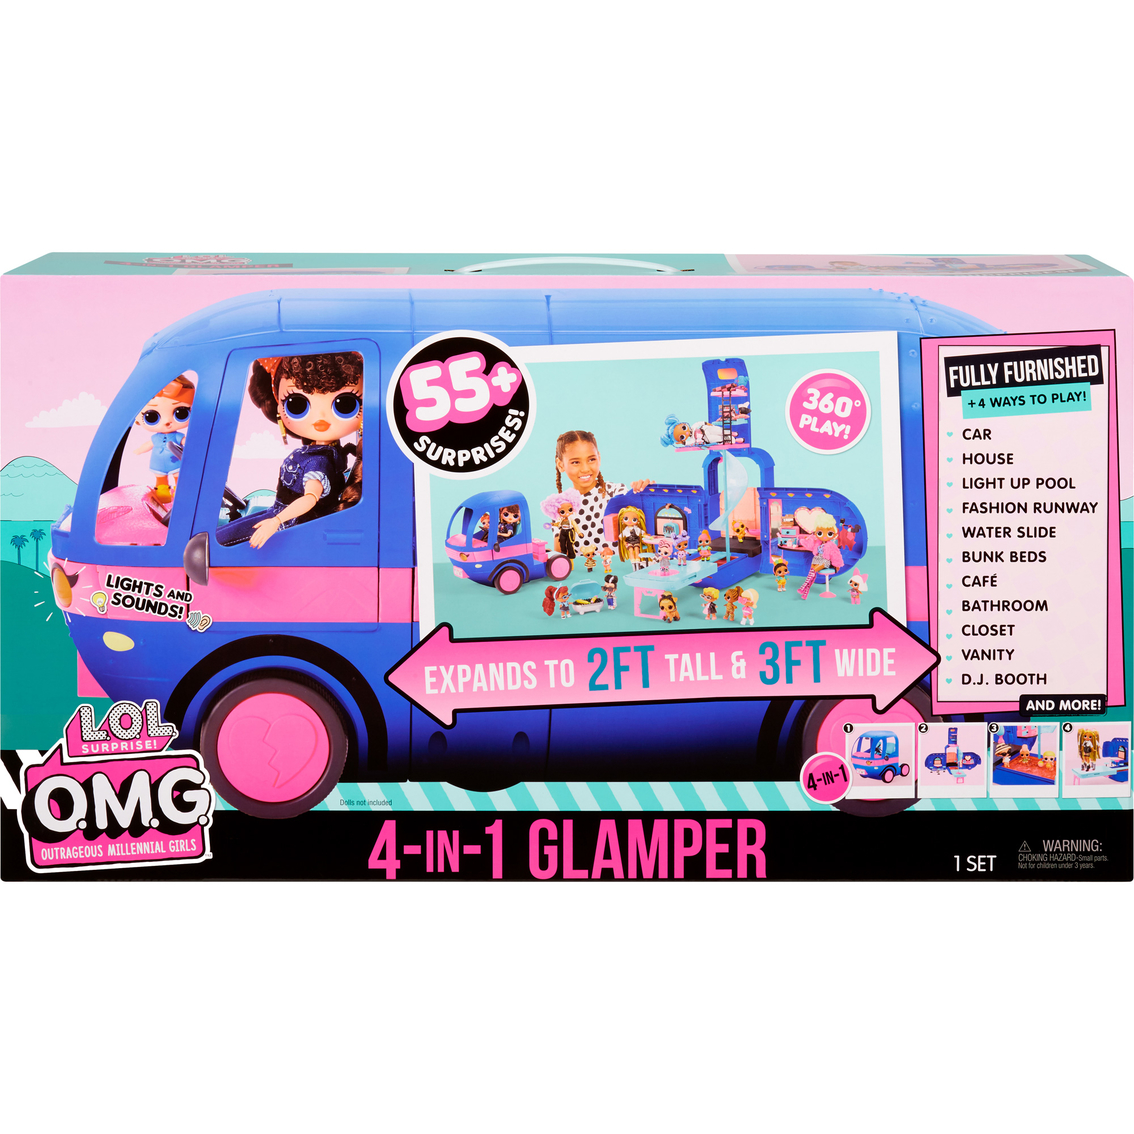 Glamper Fashion Camper Dollhouse LOL Surprise OMG 4-in-1 with 55 Surprises Blue 